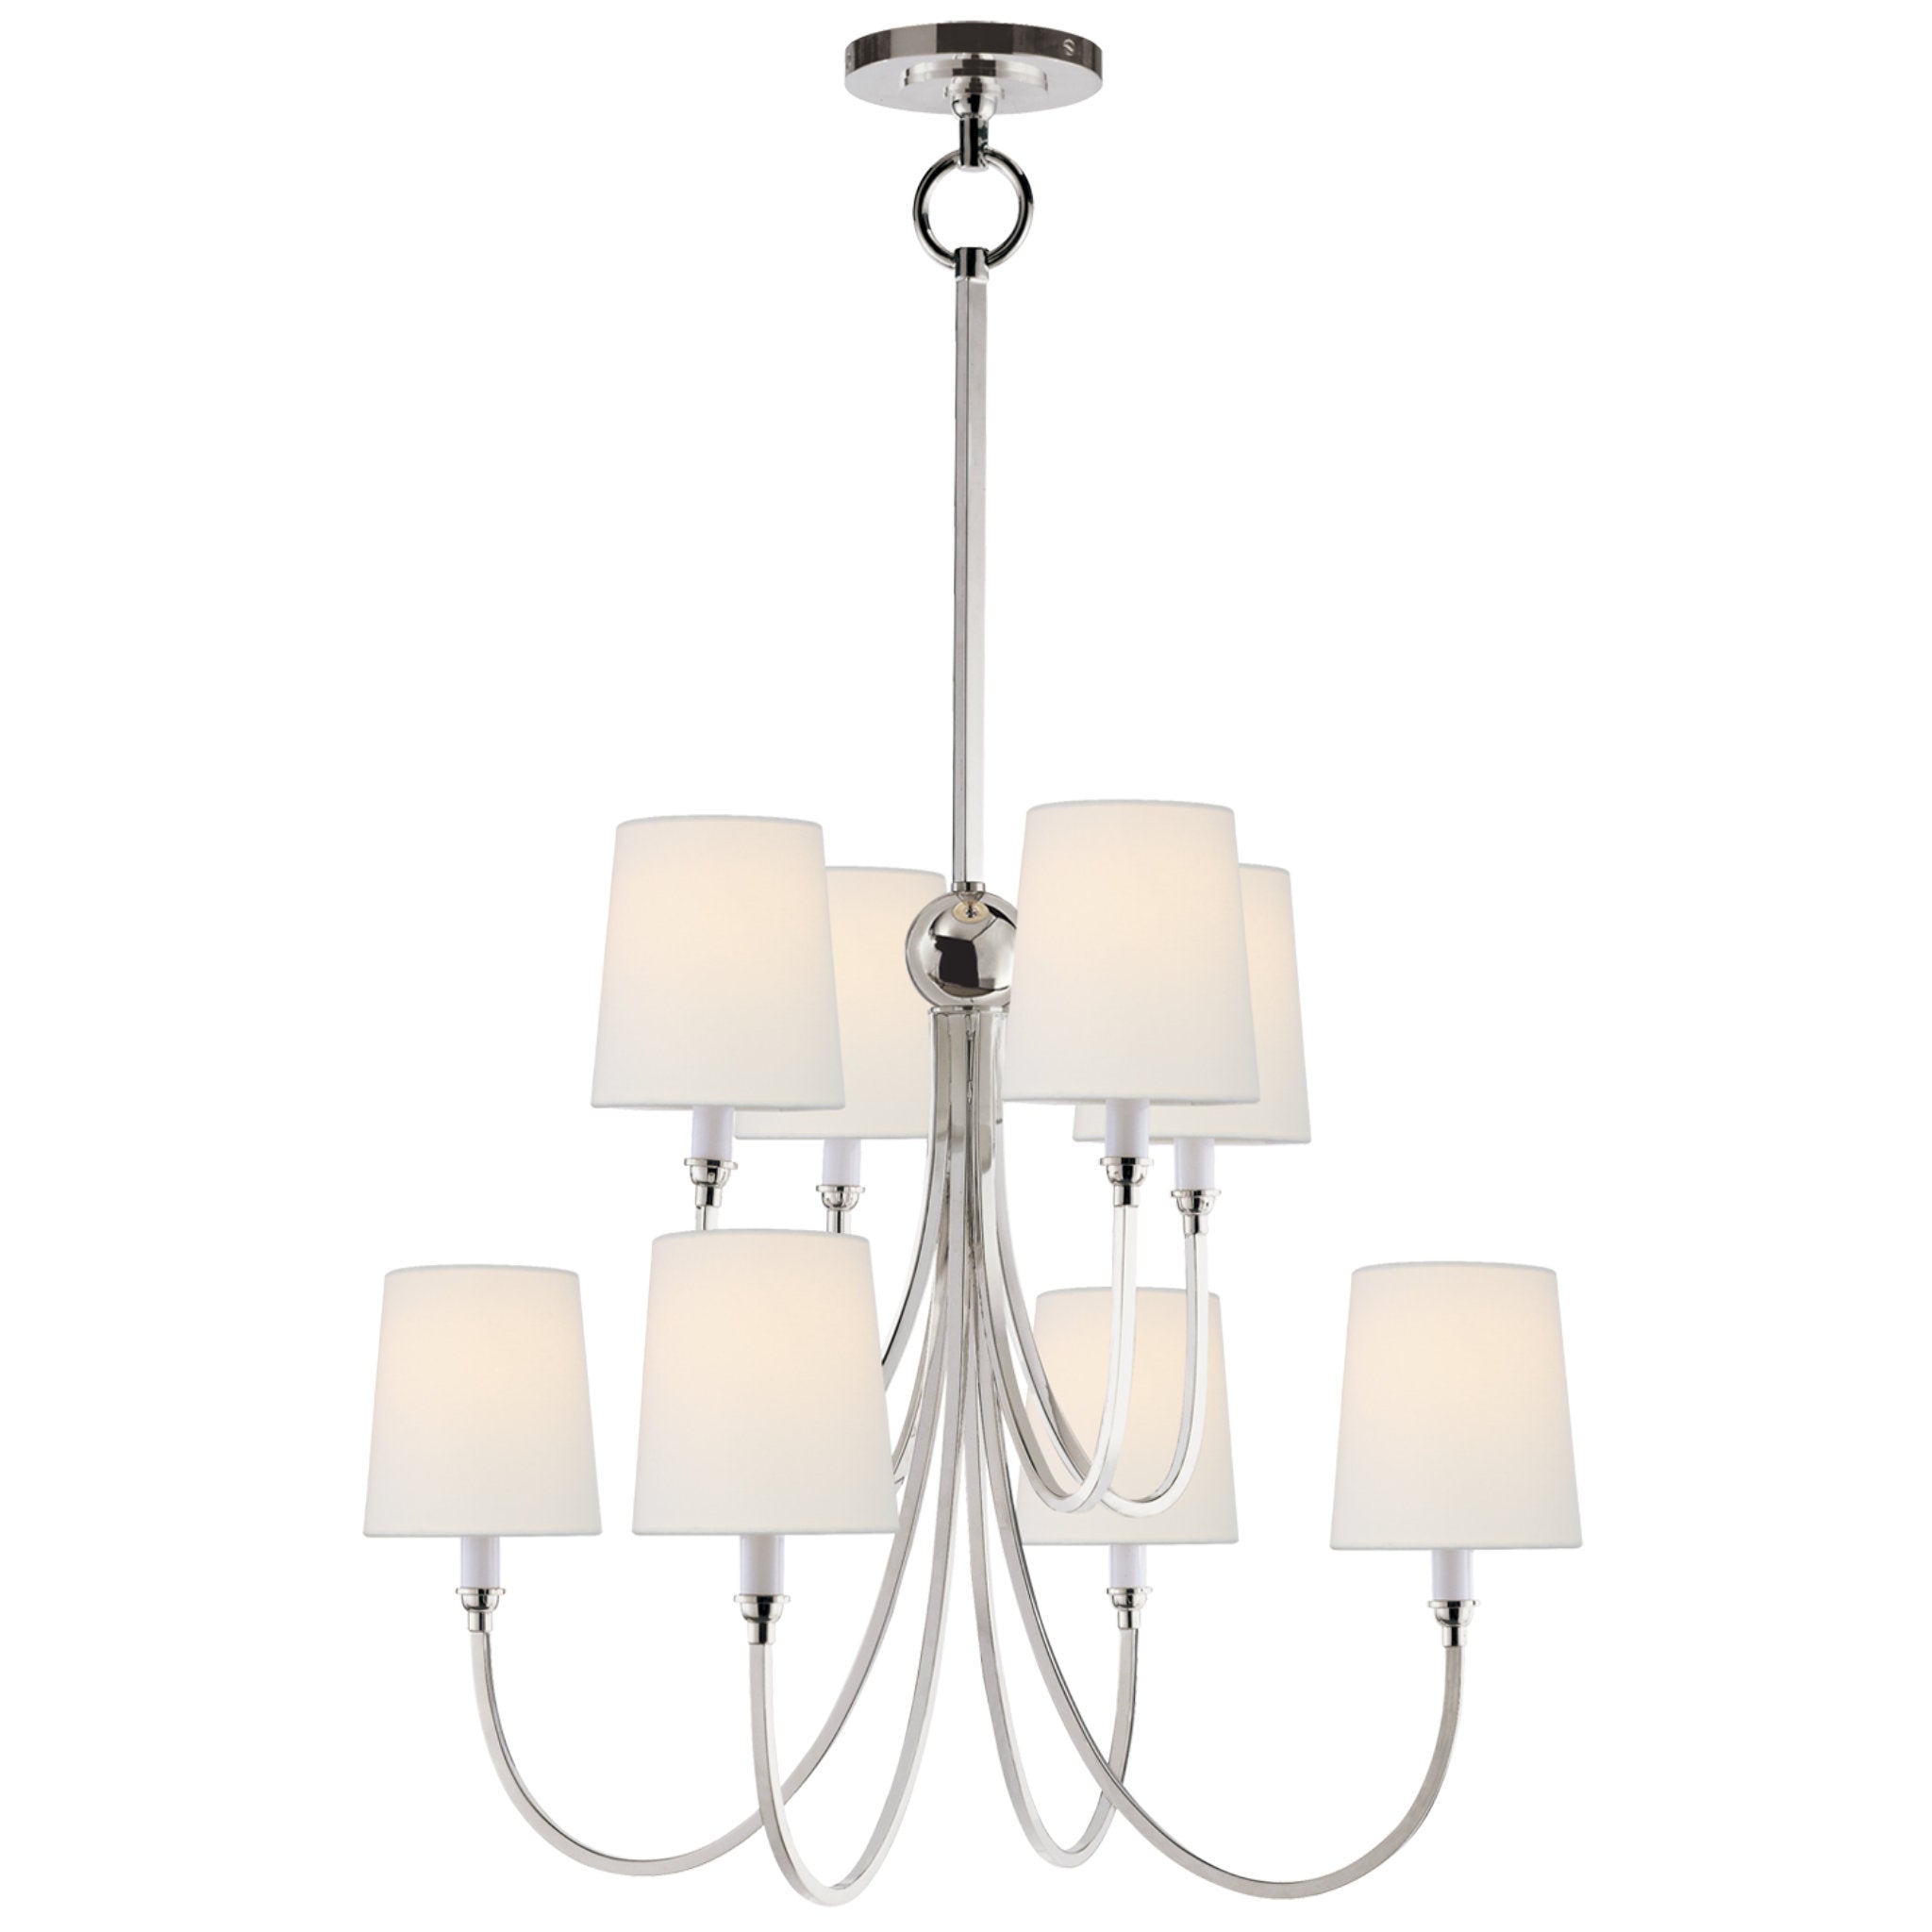 Thomas O'Brien Reed Large Chandelier in Polished Nickel with Linen Shades